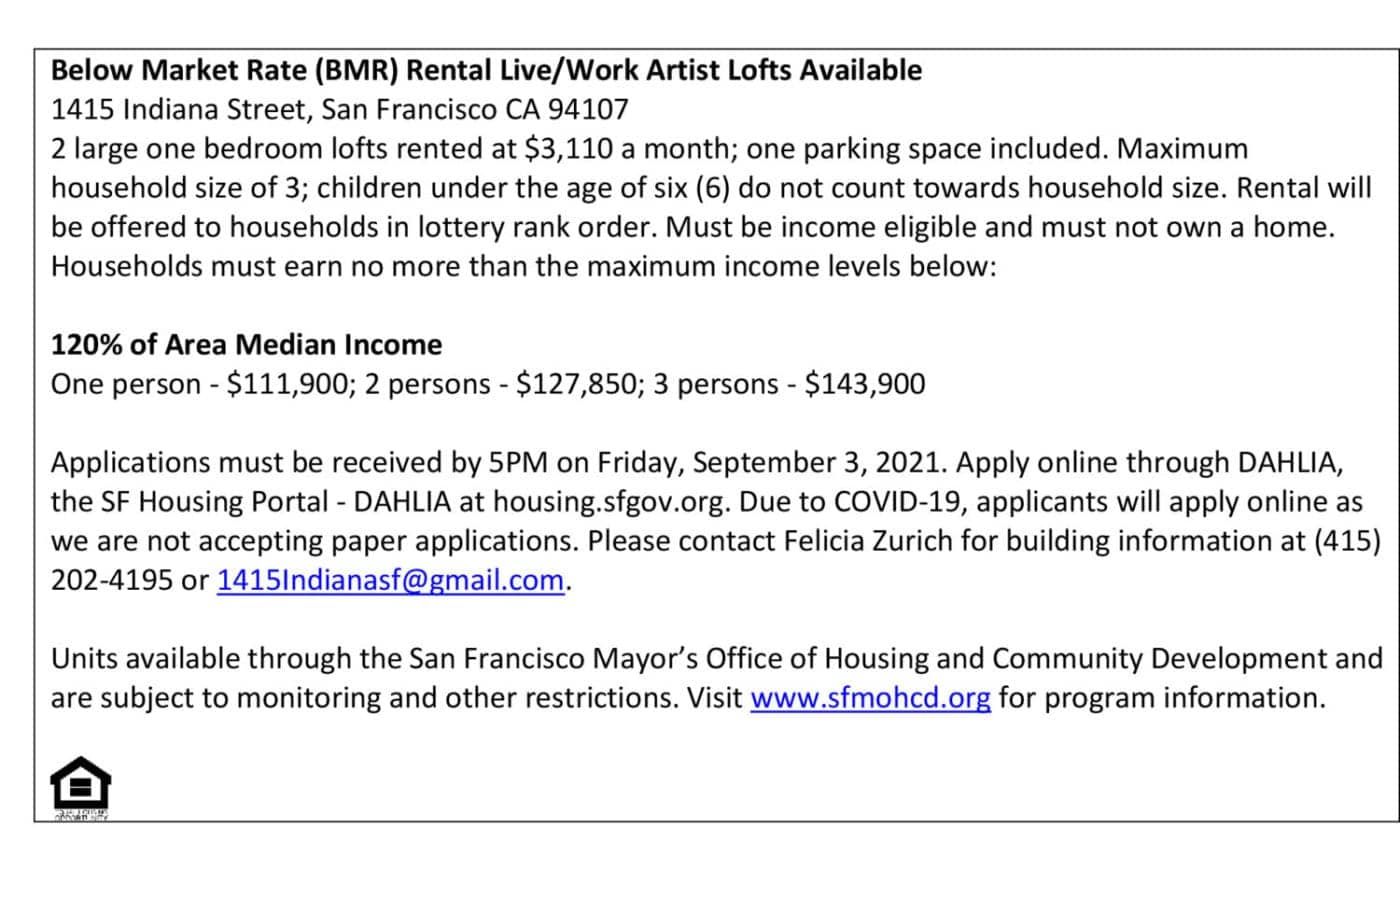 1415-Indiana-080621-1400x912, Below market rate live-work lofts at 1415 Indiana - apply by Sept. 3, Affordable Housing 